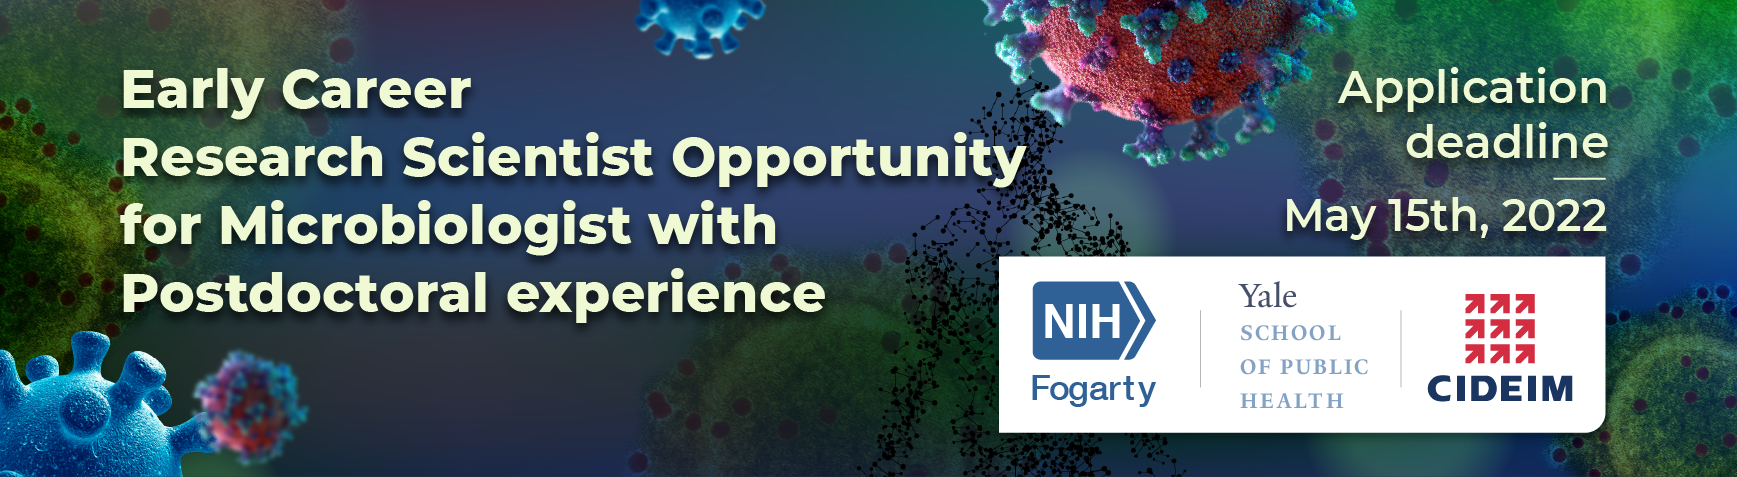 Early Career Research Scientist Opportunity for Microbiologist